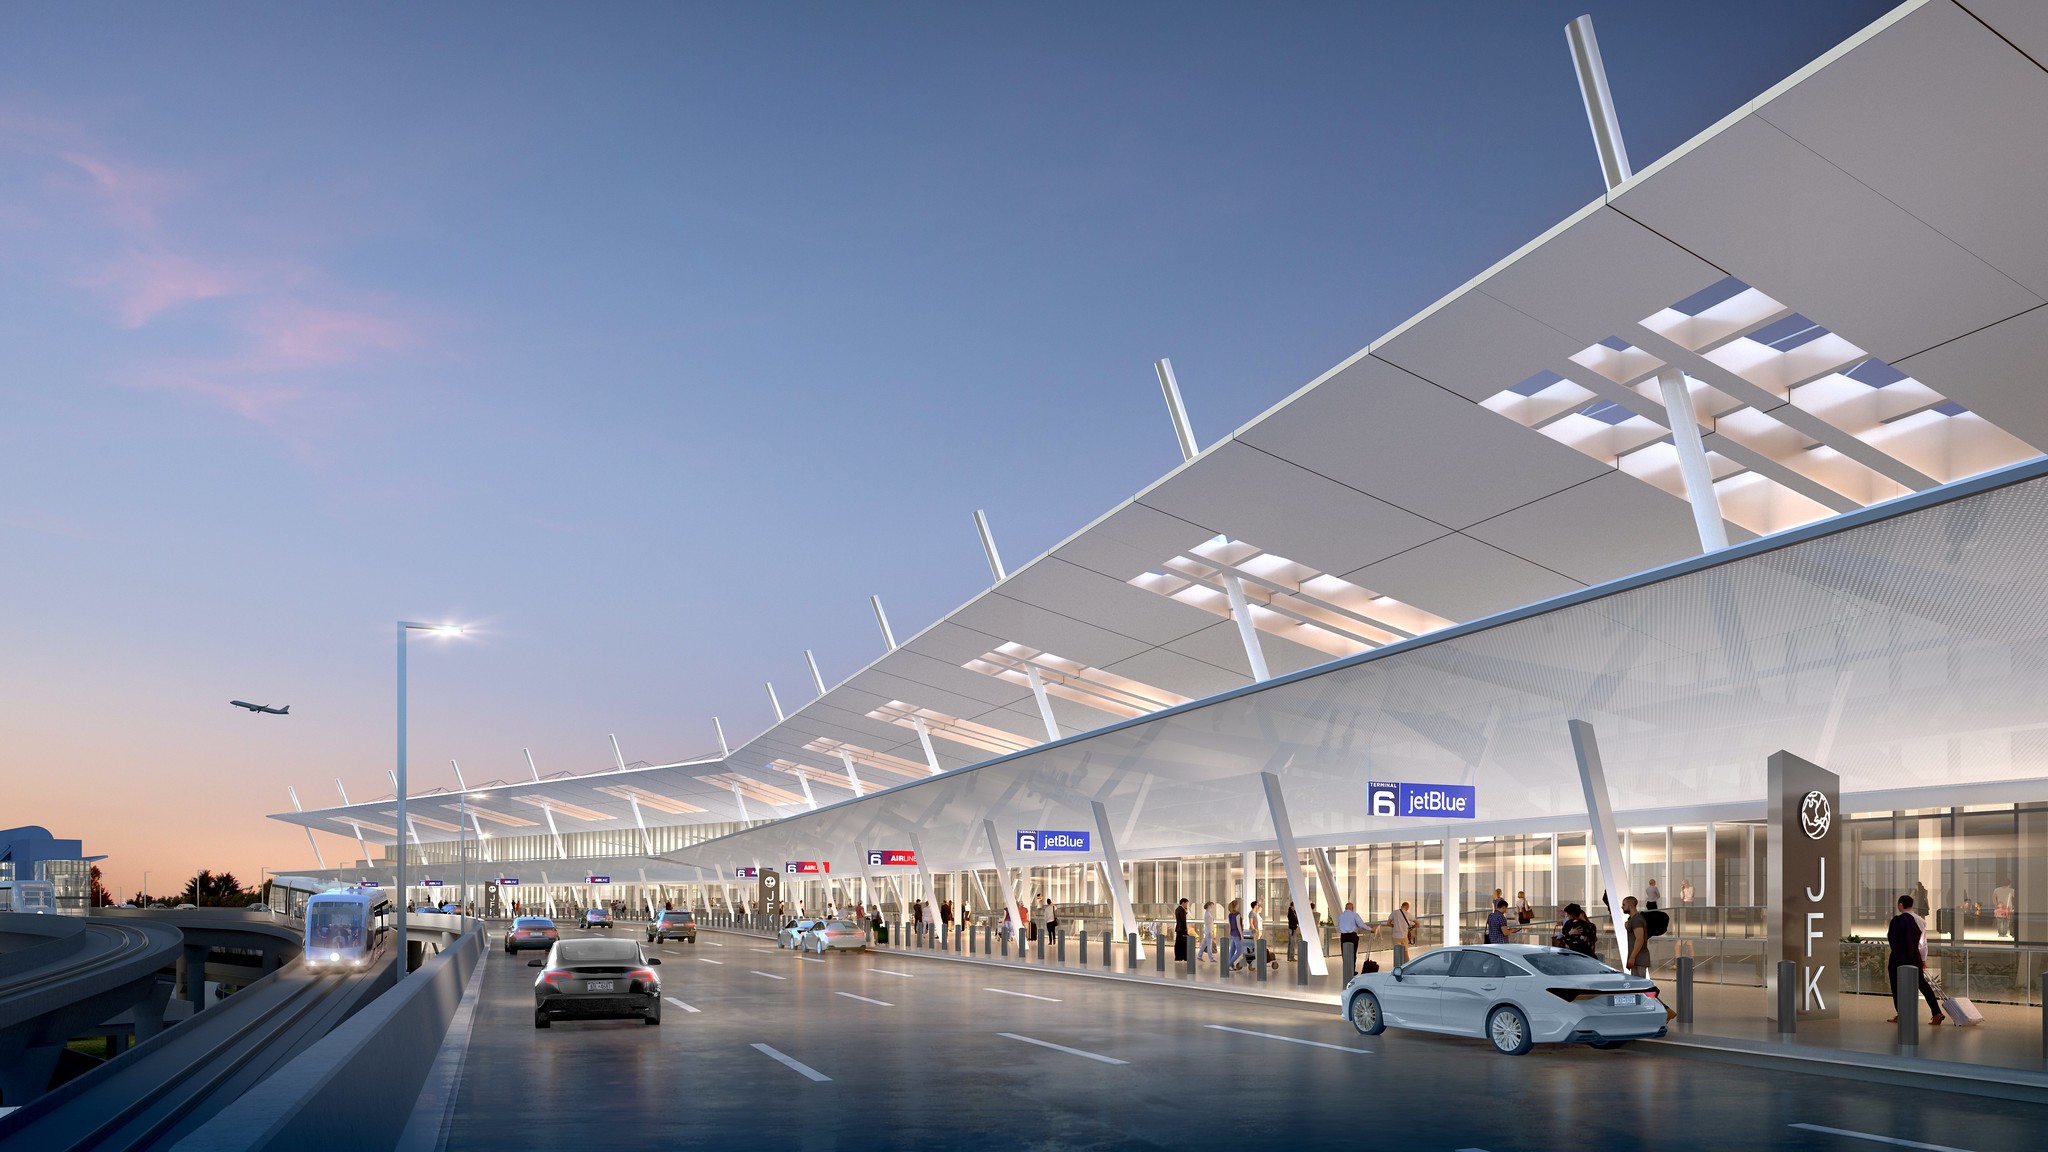 Terminal 6 will have the longest departures curb at JFK, with airline-branded passenger drop-off zones